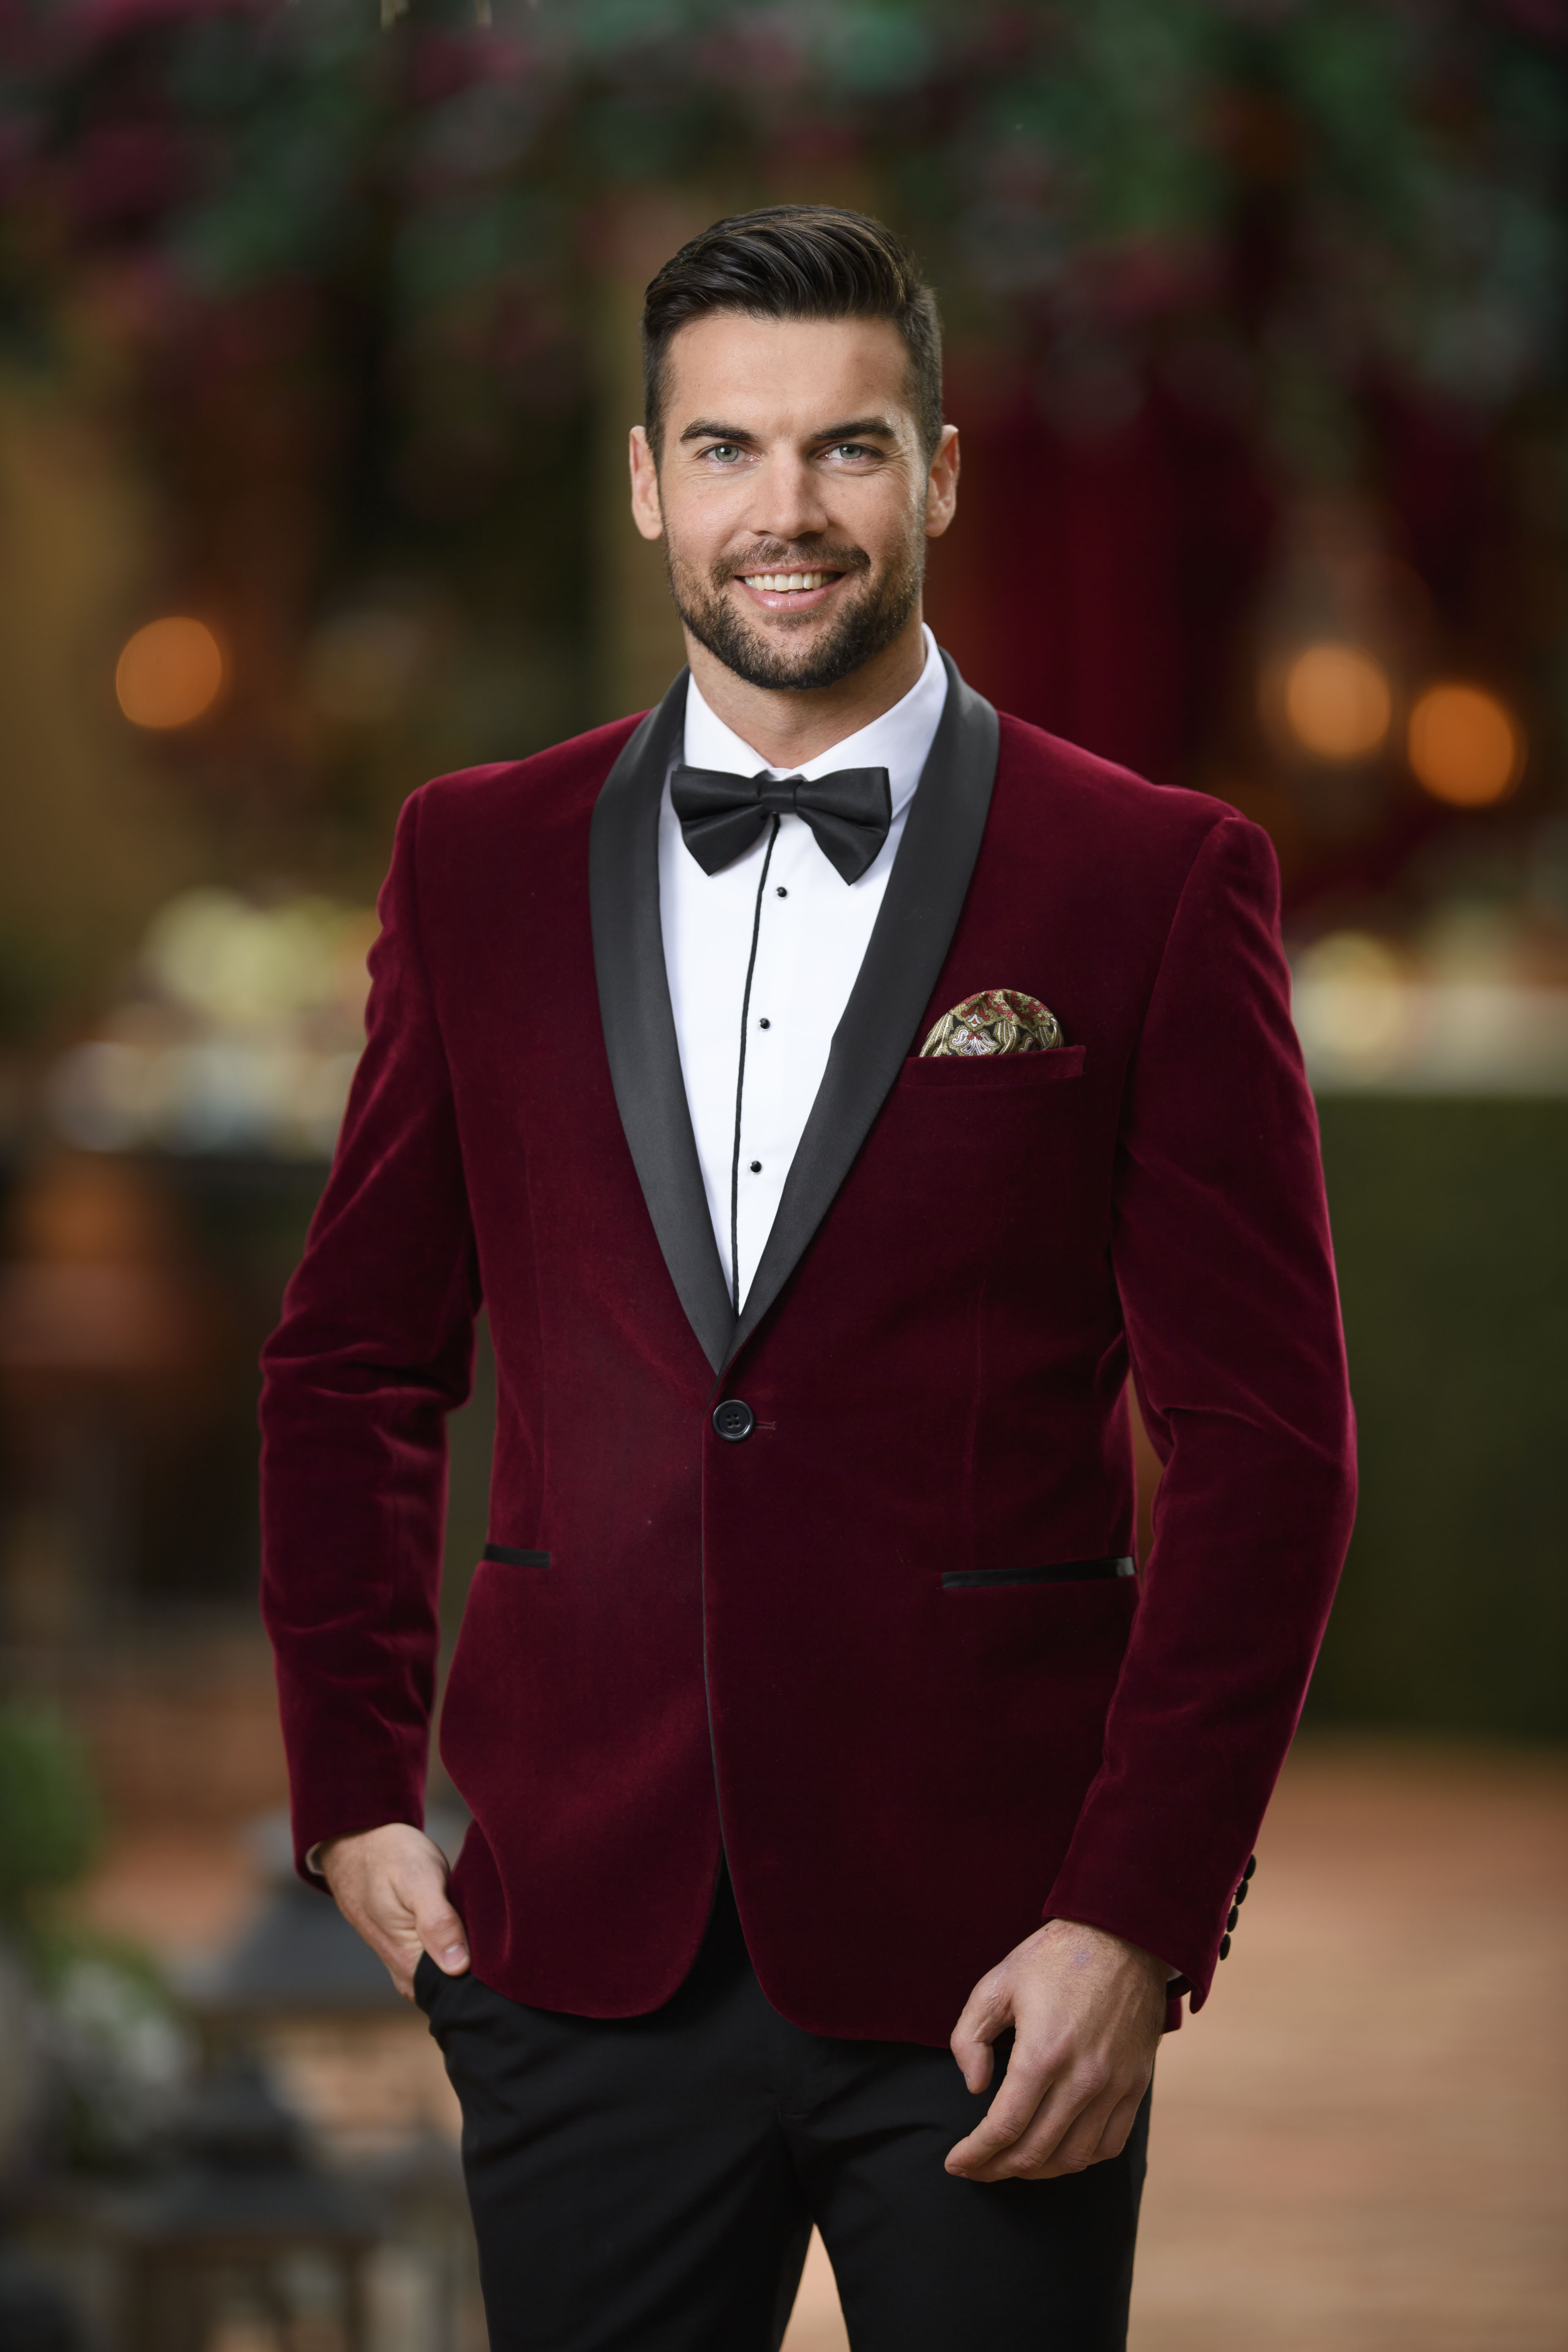 Four Of Sophie Monk's Young Bachelorette Contestants Have Been Revealed | Punkee